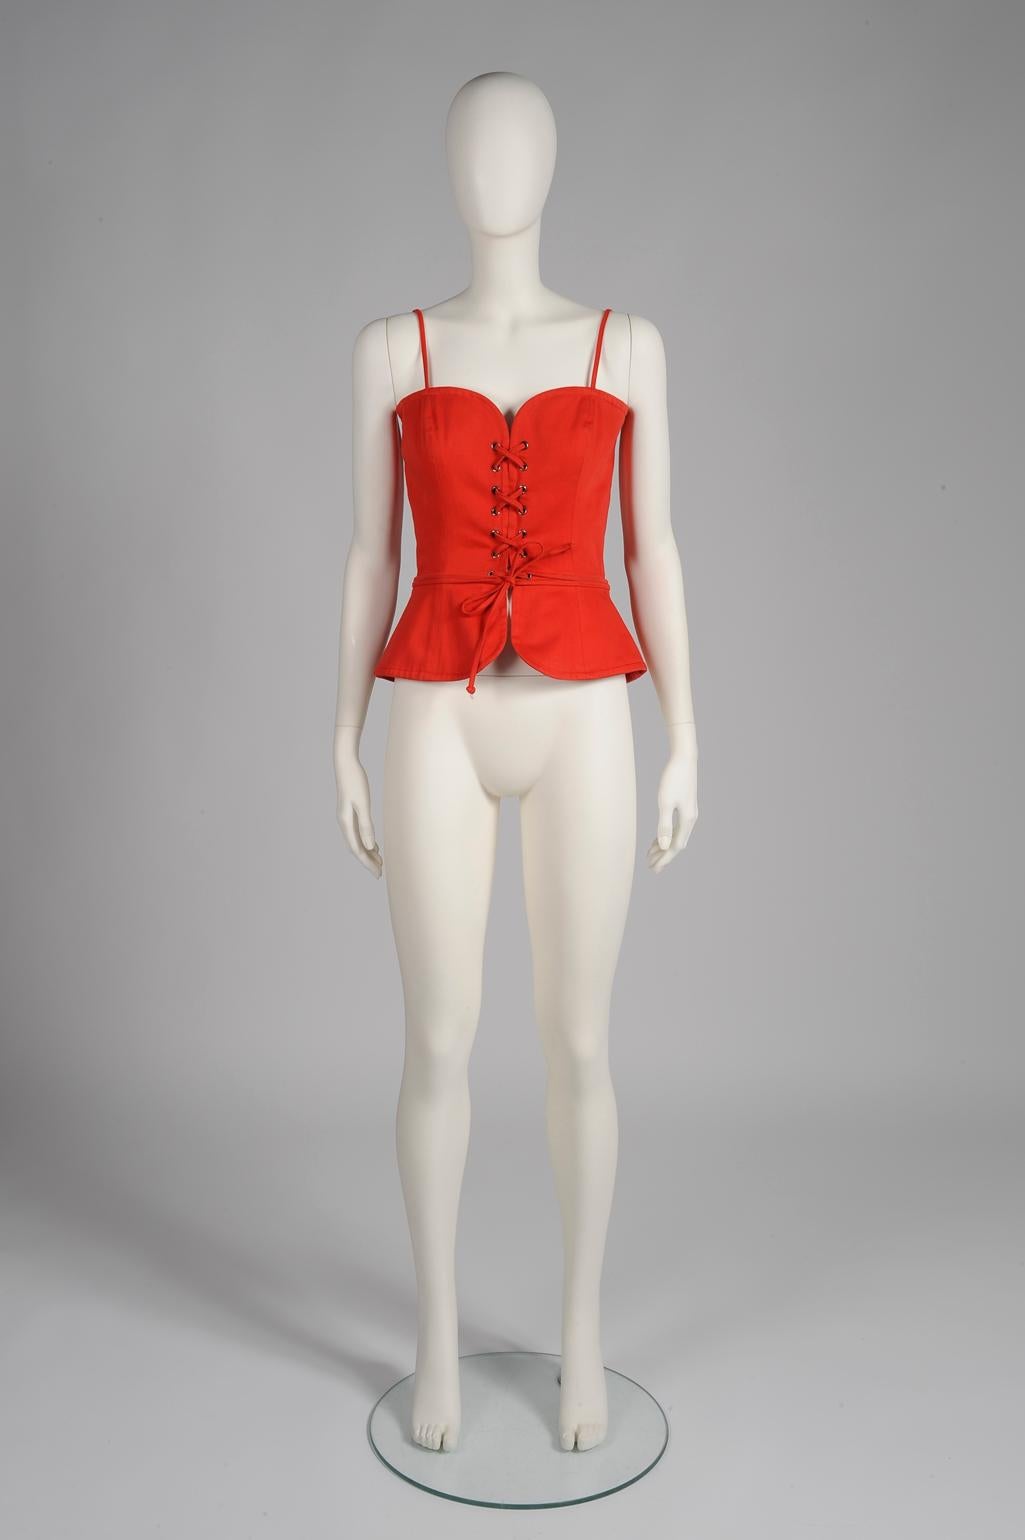 Among the most iconic YSL pieces, this laced corset top (with or without sleeves) is definitively a major essential to complete any refined modern wardrobe. To confirm that, Anthony Vaccarello, nowadays heading the YSL creative department, has